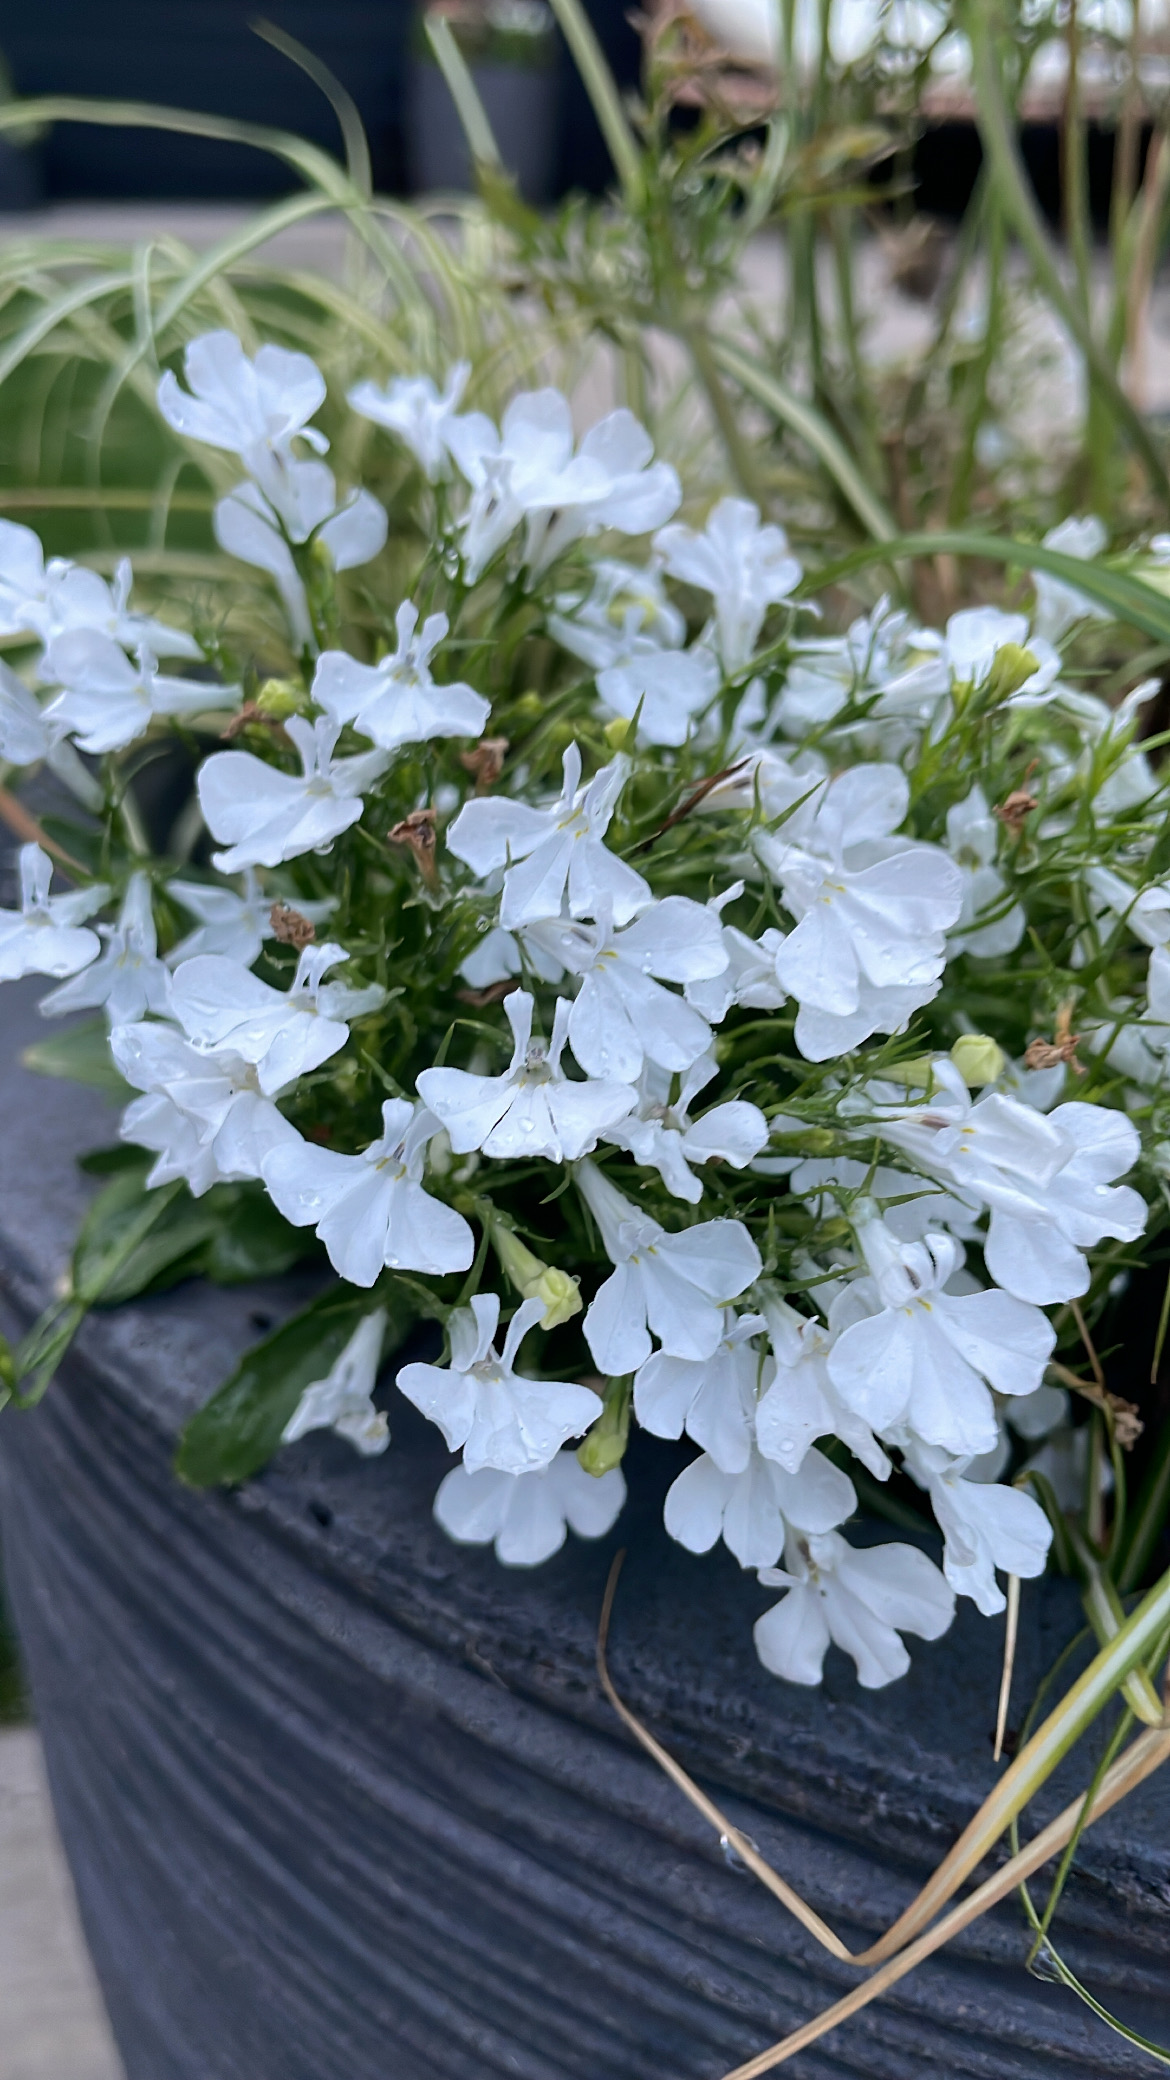 close up of white lobelias at the edge of a container